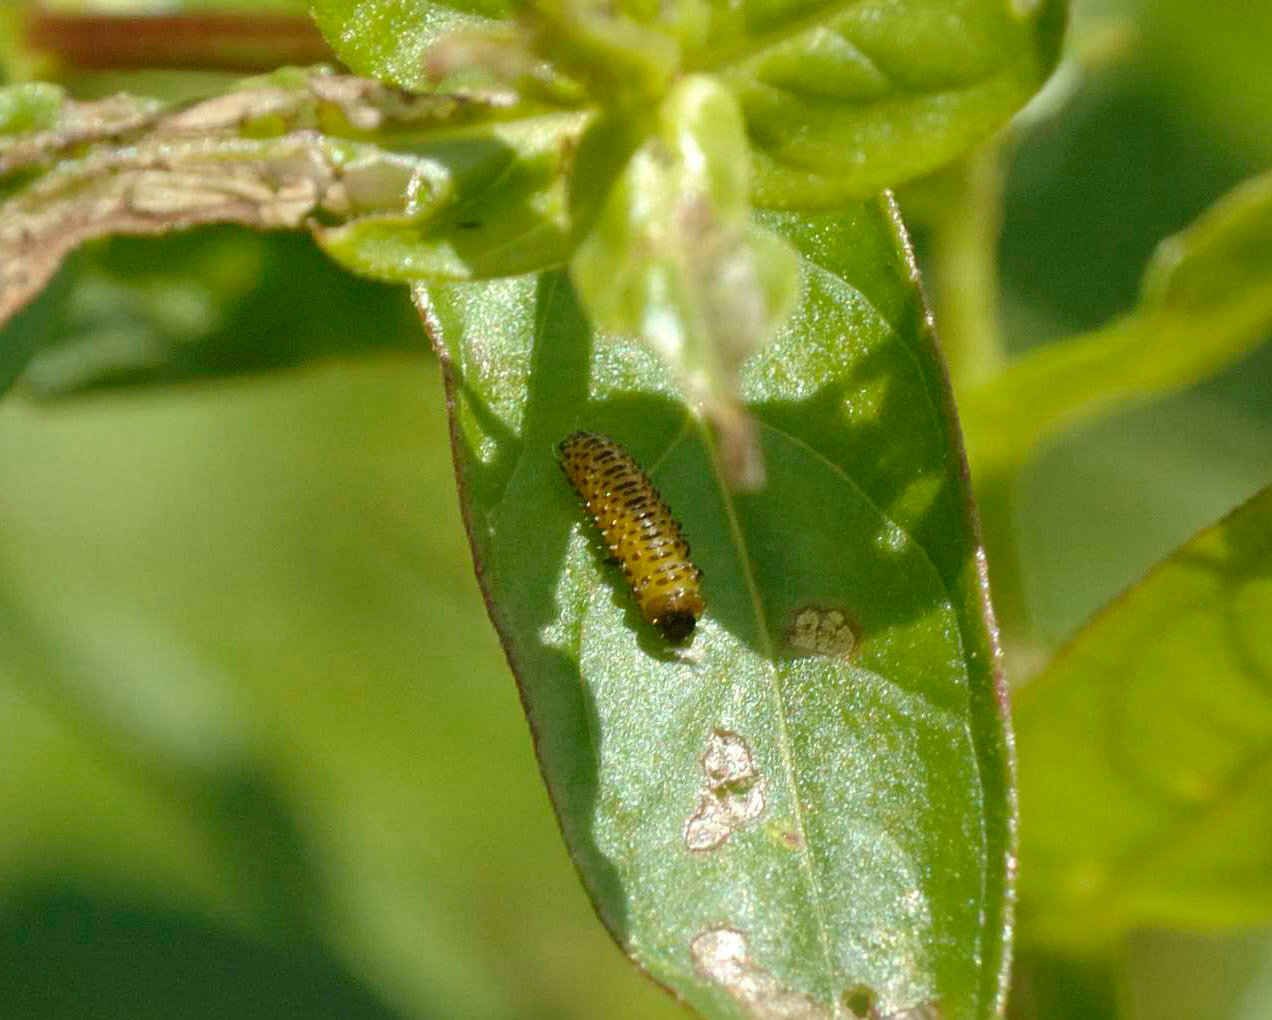 A larval Galerucella is present on a purple loosestrife plant and appears to be in one of the last instars before becoming an adult. The larvae of the Galerucella also feed on loosestrife. The damage done to a purple loosestrife plant by Galerucella resembles shotgun pellet holes.